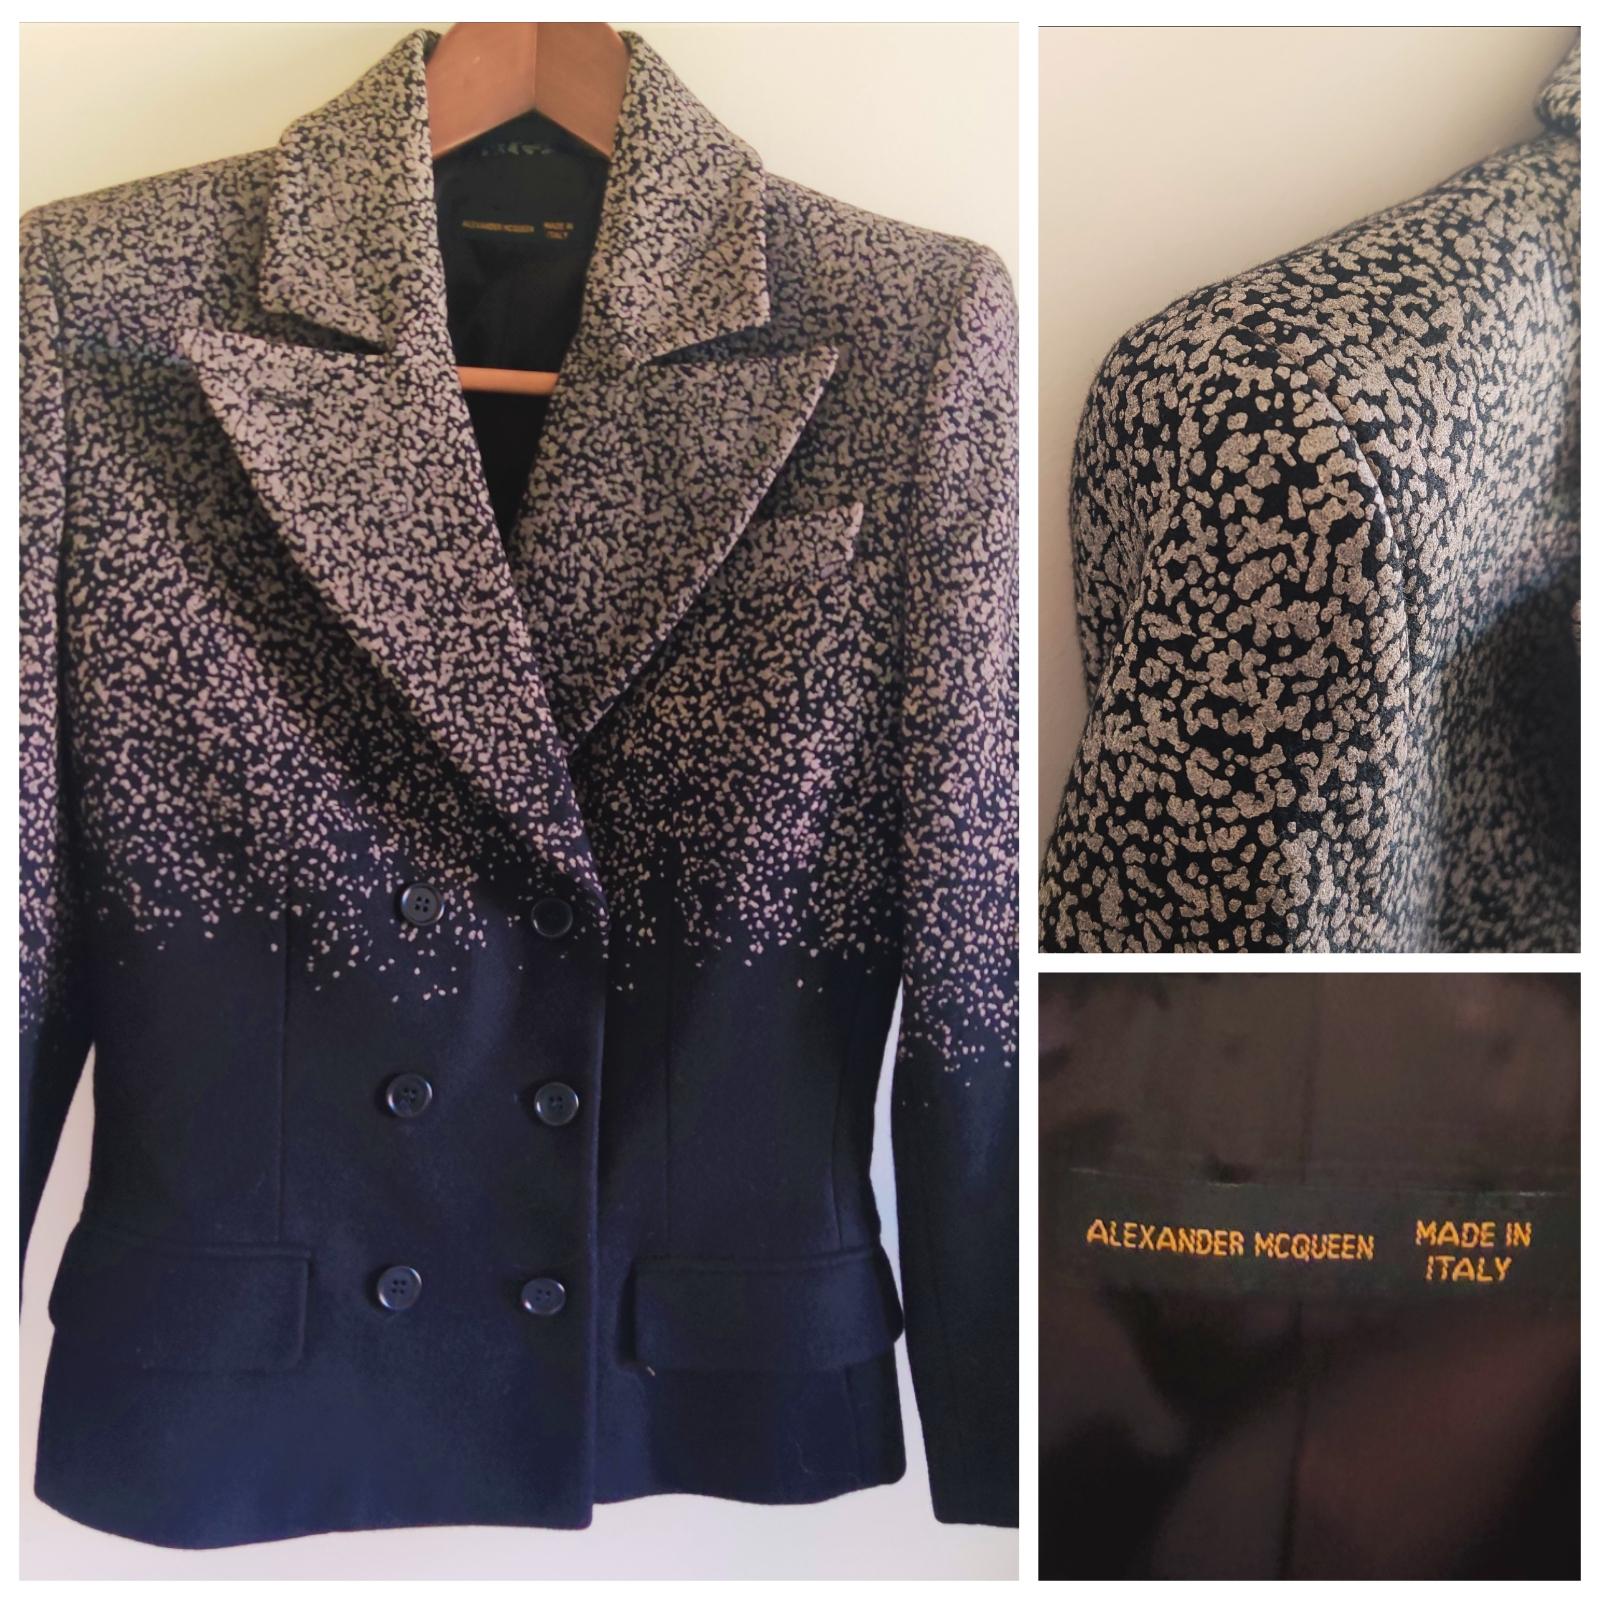 Alexander McQueen blazer jacket.
Solid shuolder pads, great silhouette.

Very good condition.

SIZE
Medium. Marked size: Italian 42. 
Length: 56 cm / 22 inch
Armpit to armpit: 44 cm  / 17.3 inch
Waist: 38 cm / 15 inch
Shoulder to shoulder: 39 cm /